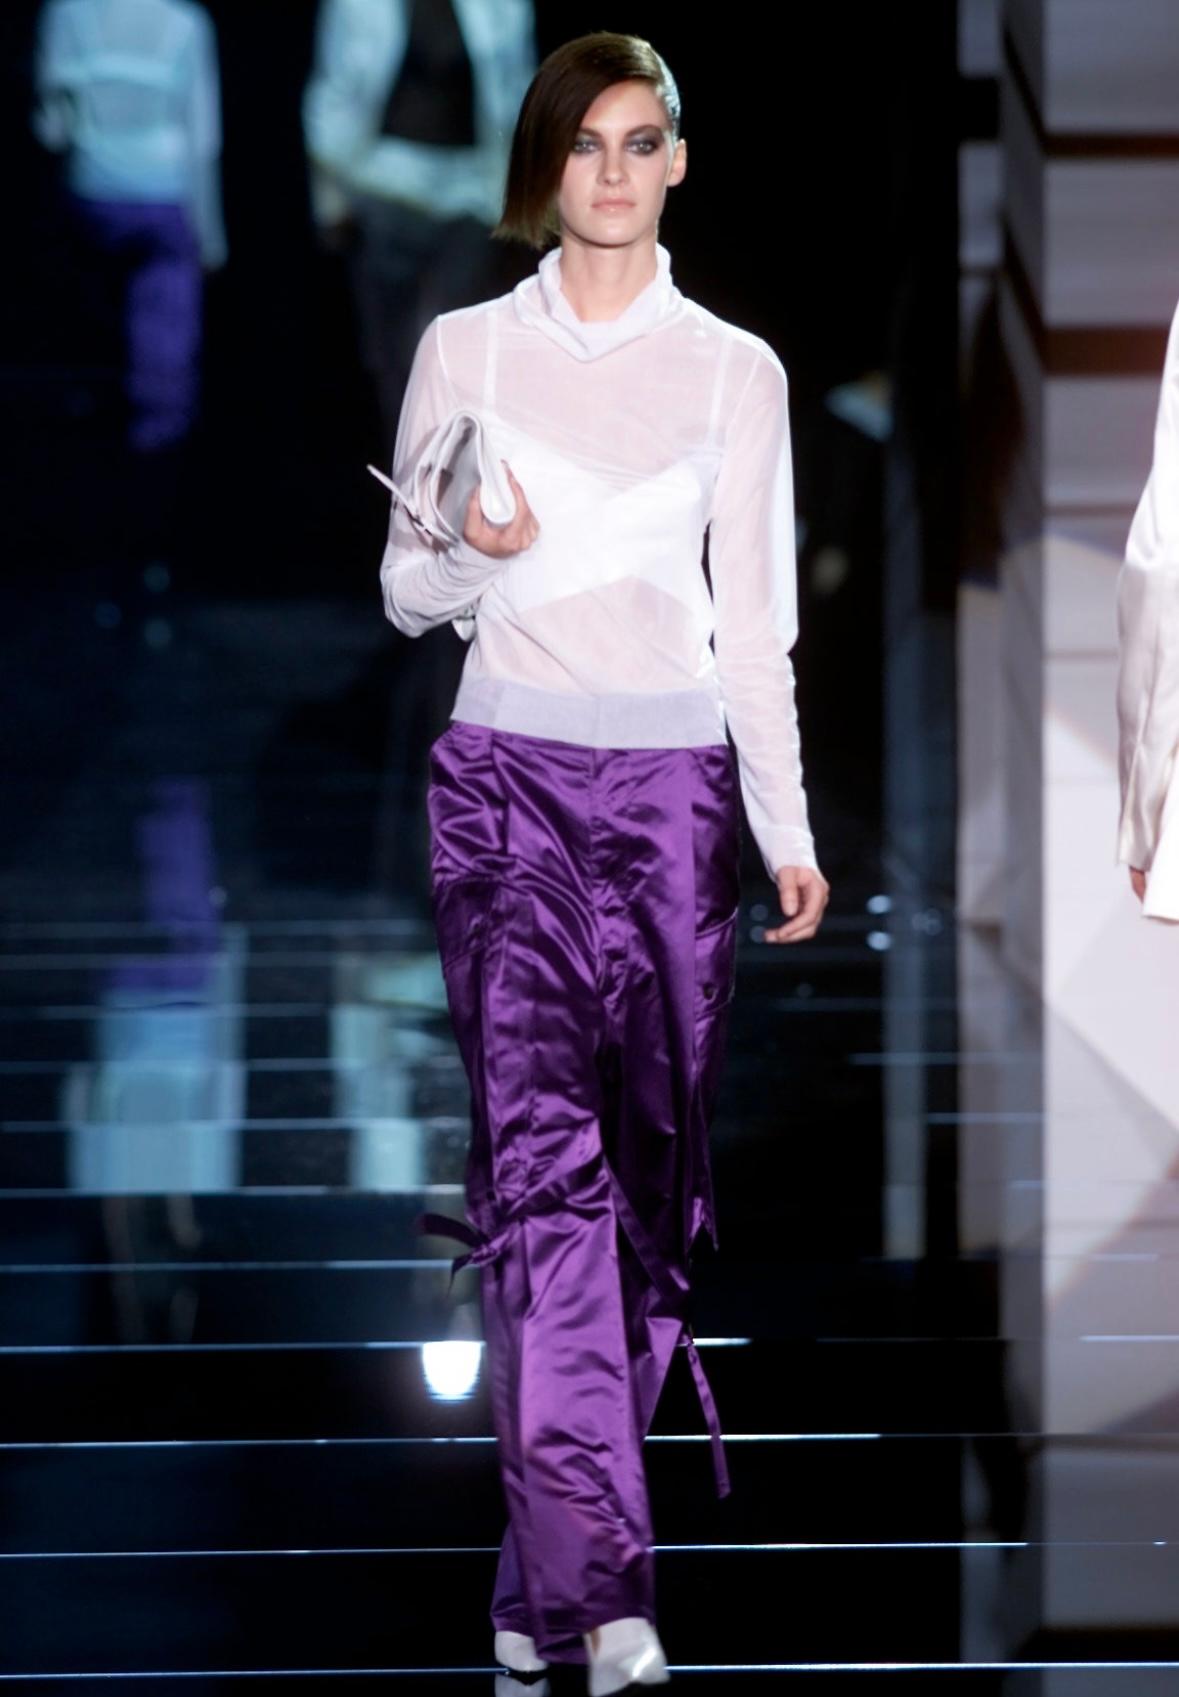 Presenting a pair of incredible purple satin Gucci pants, designed by Tom Ford. From the Spring/Summer 2001 collection, these extra-wide leg pants debuted on the season's runway, modeled by Mia Hessner. Entirely constructed of vibrant purple satin,